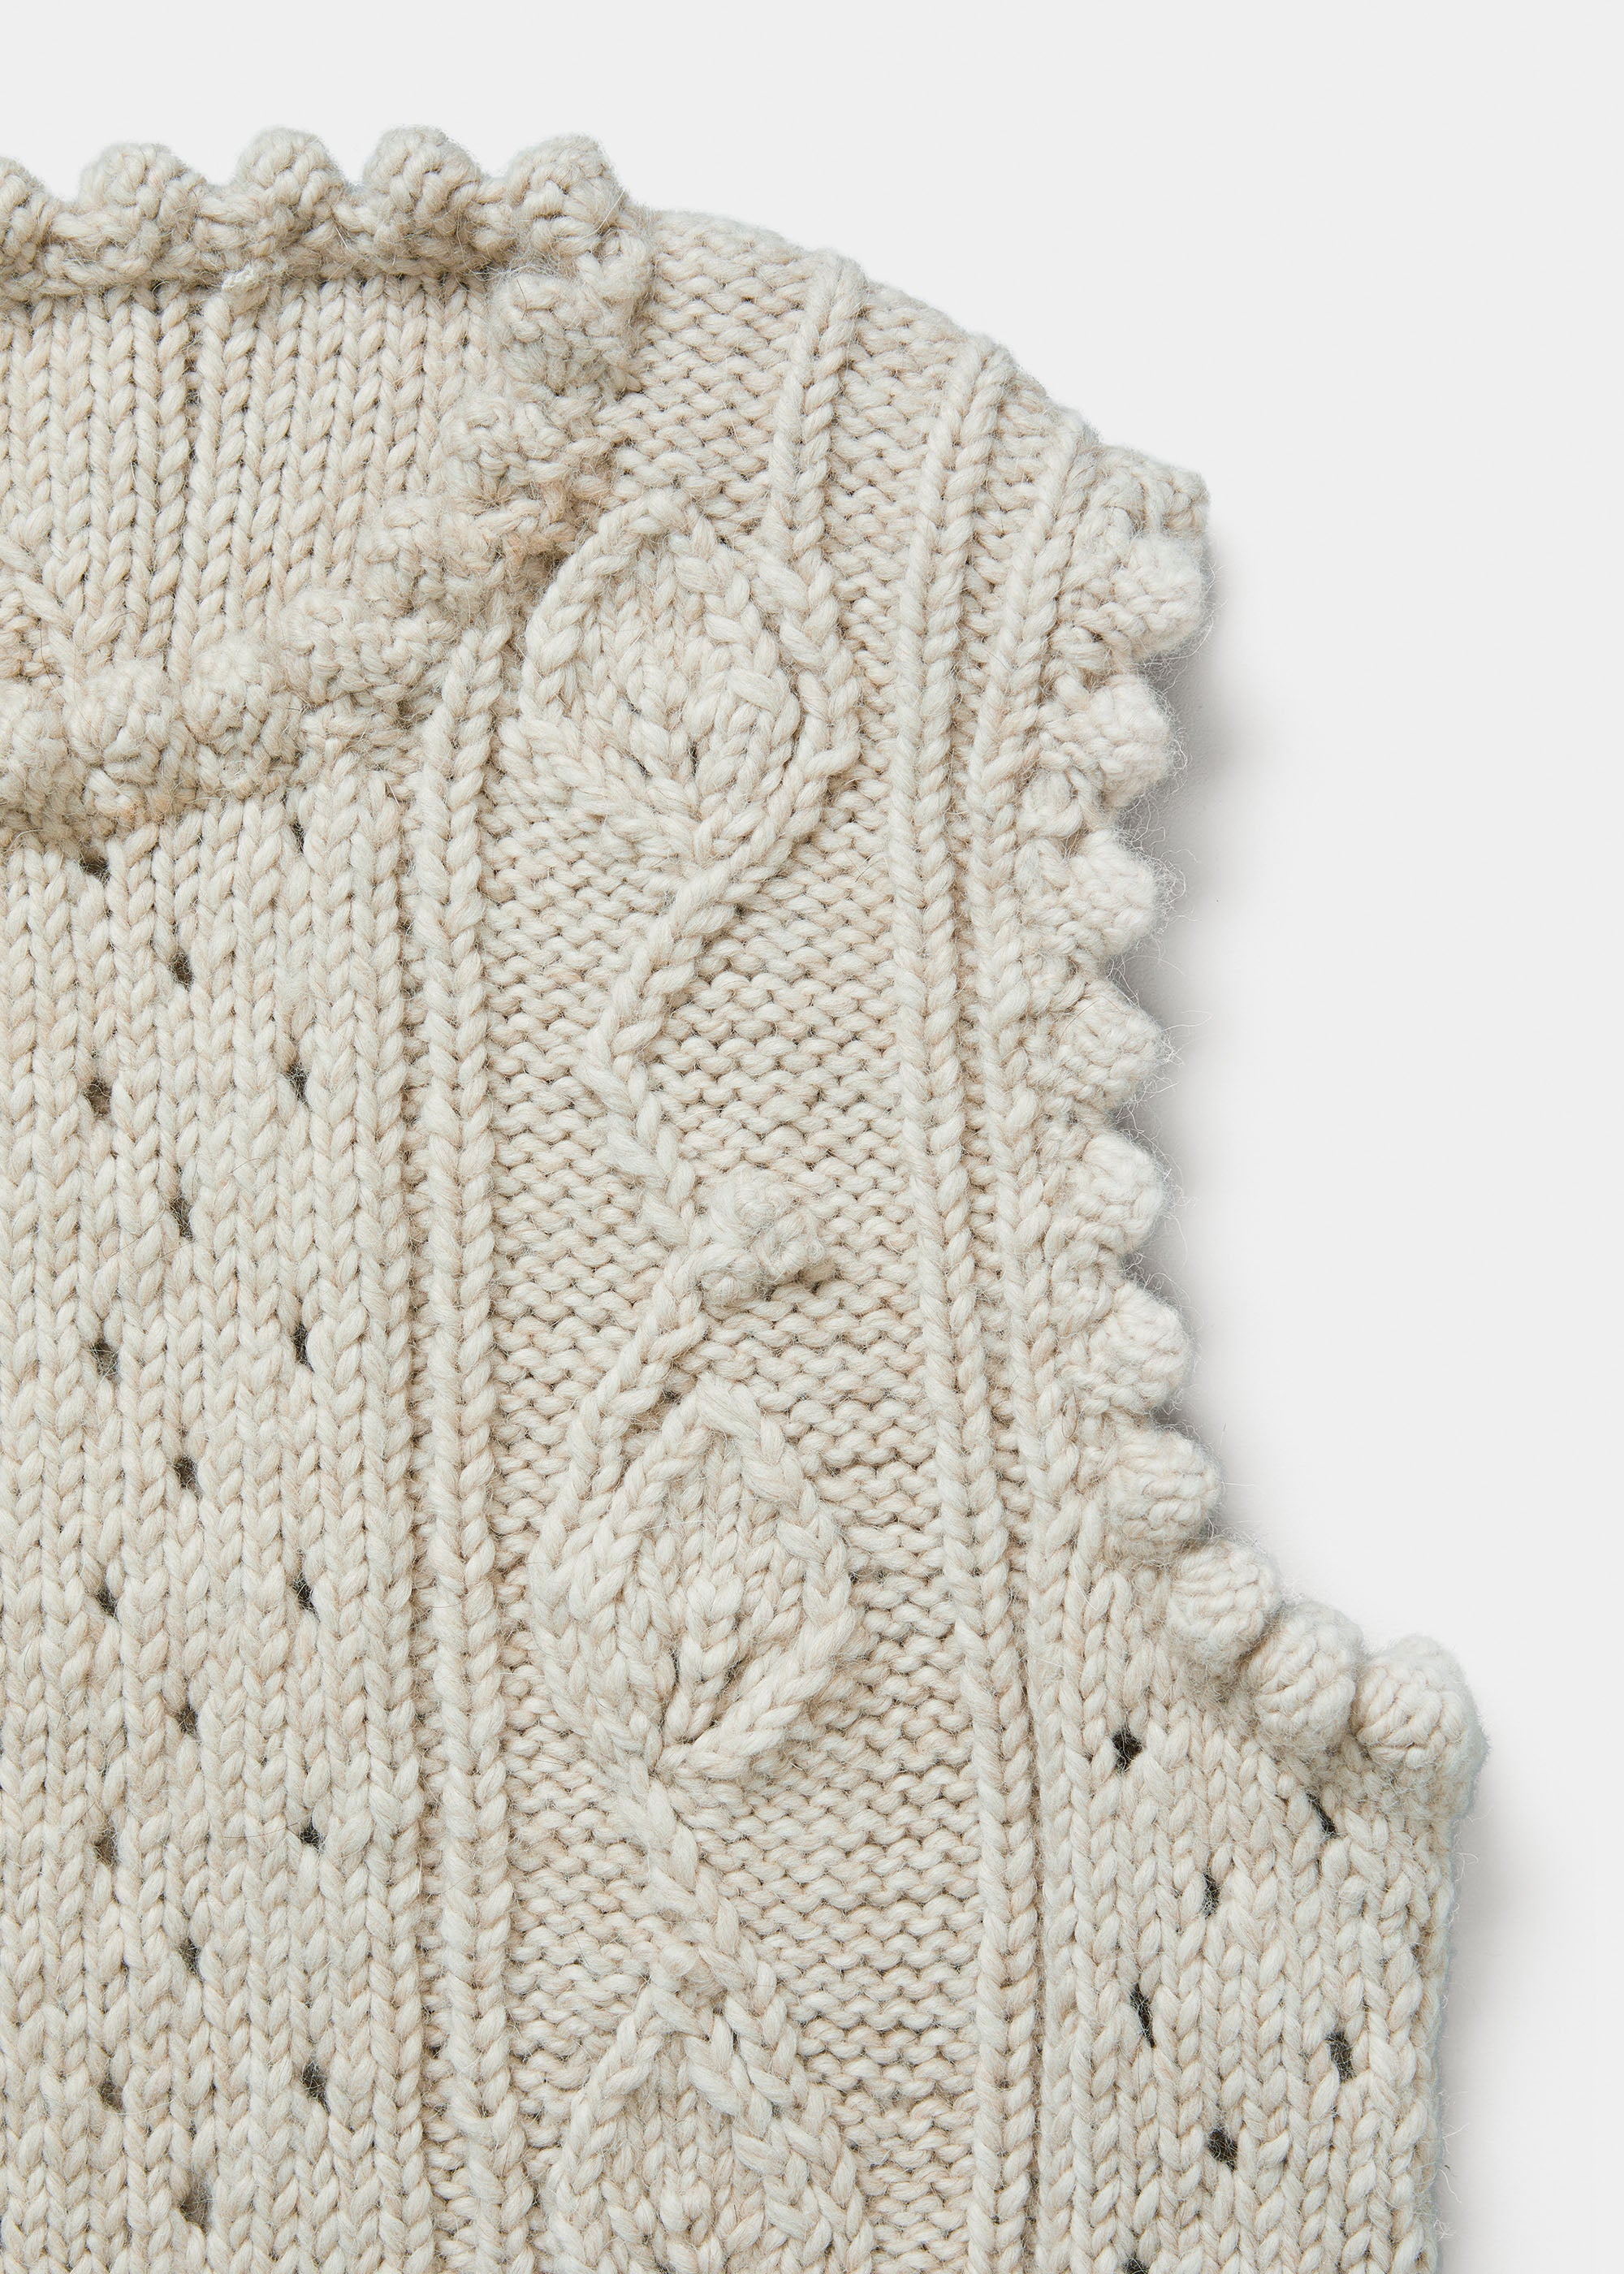 Embla handknitted vest | Pure Natural